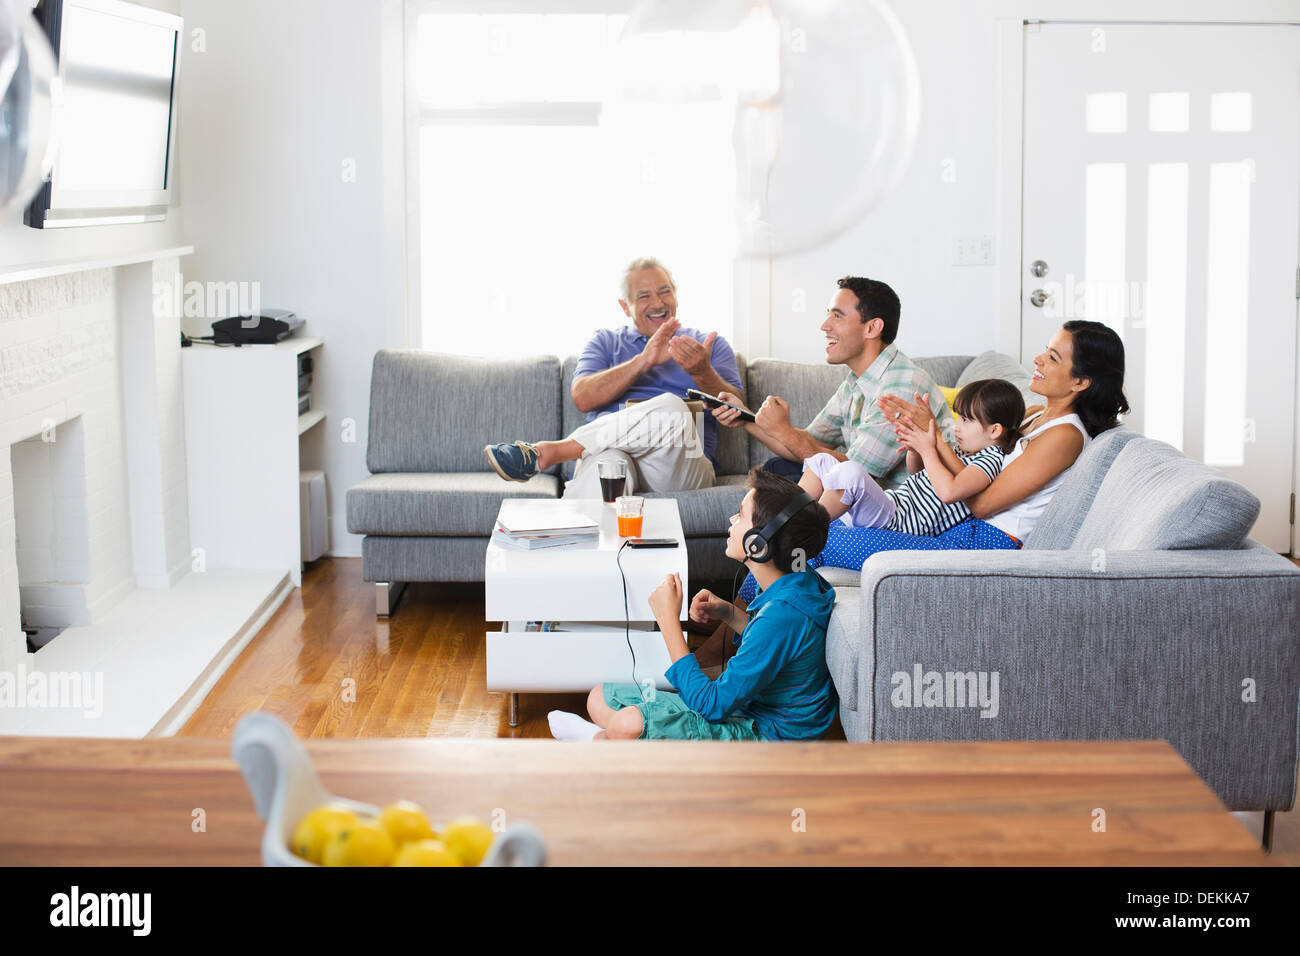 Family Watching Tv High Resolution Stock Photography and Images - Alamy